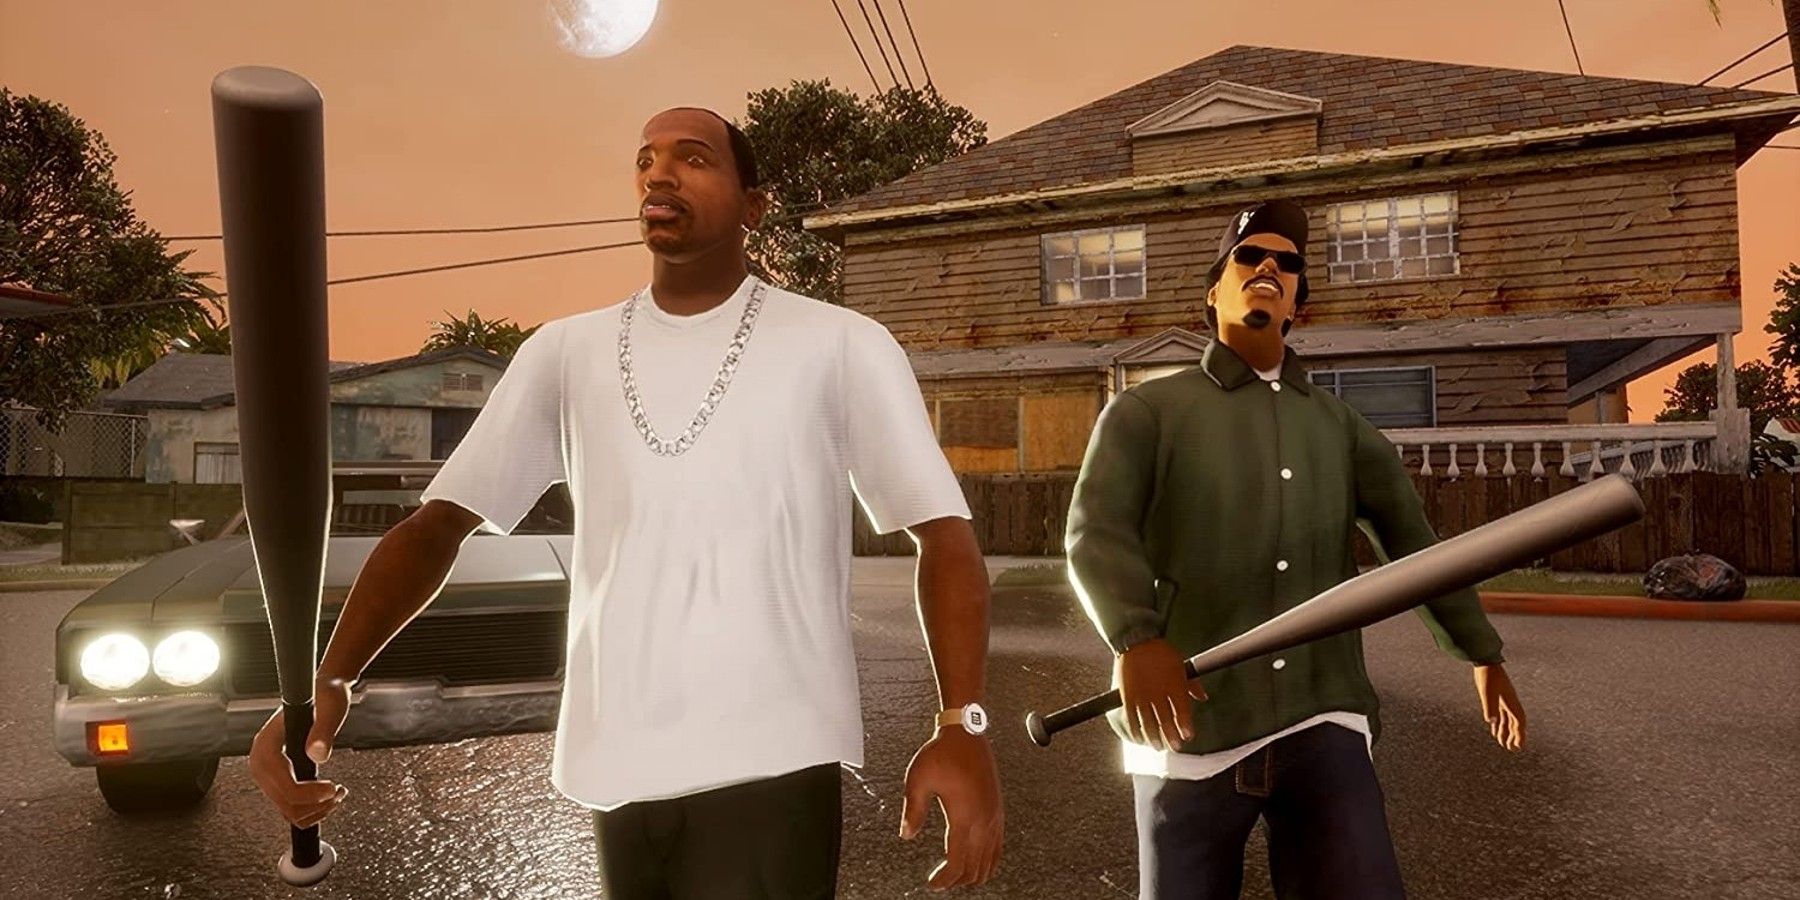 GTA Trilogy Modders Are Already Working to Fix the Game